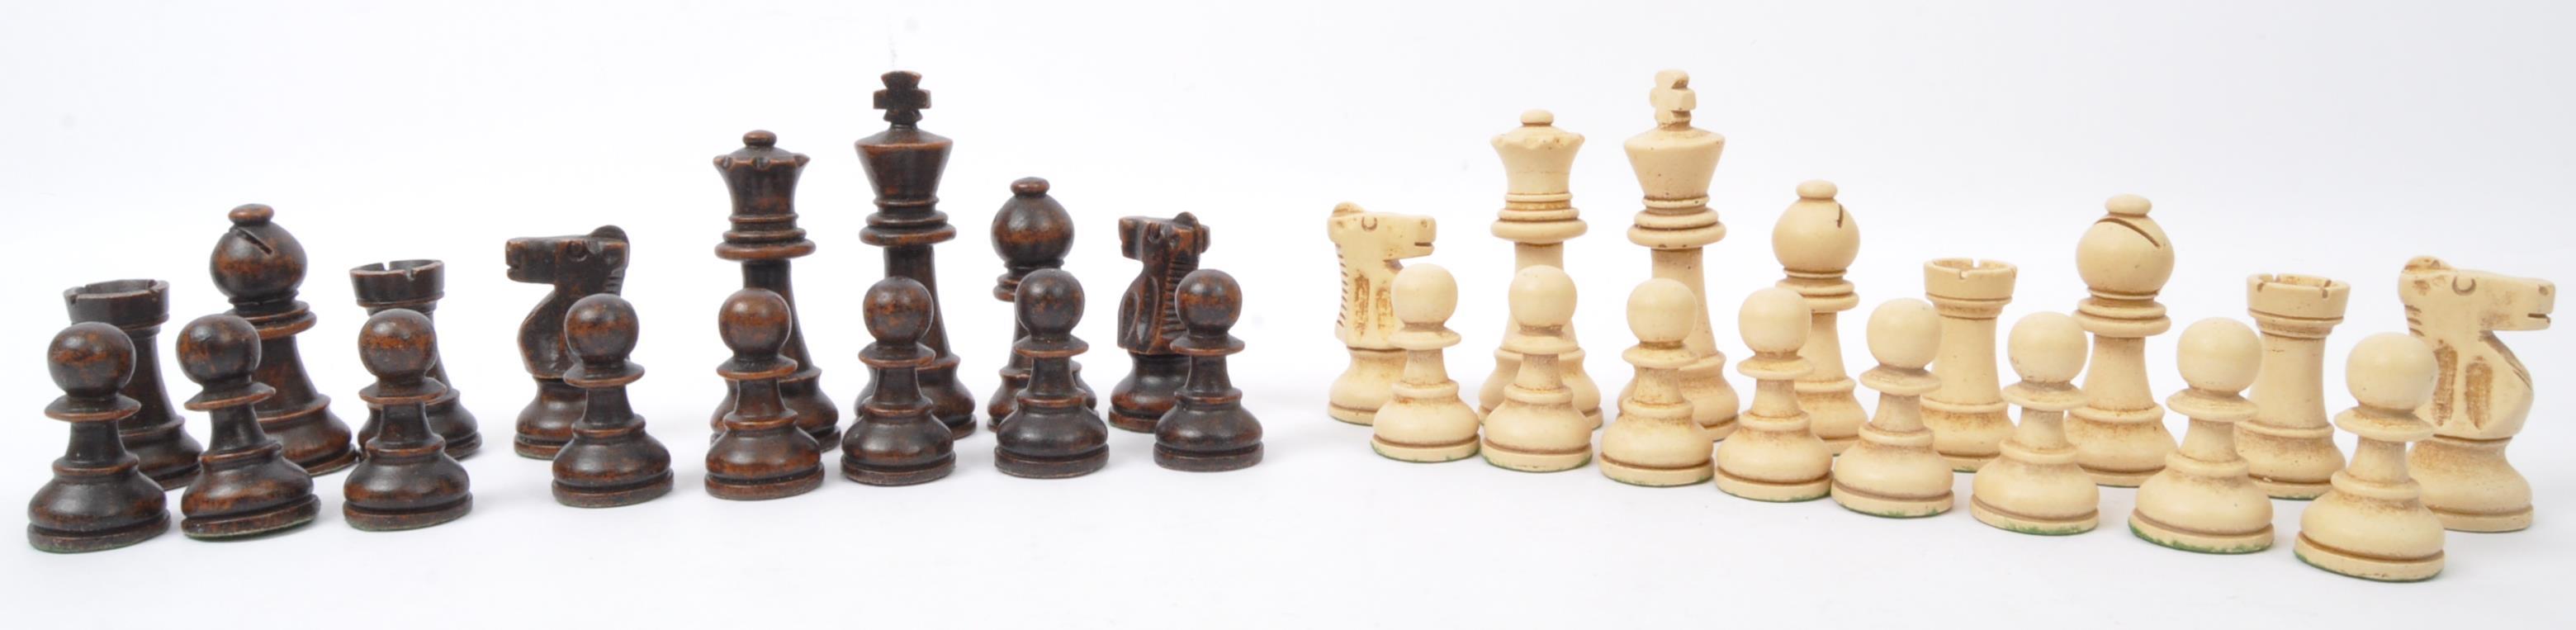 COLLECTION OF VINTAGE TURNED WOOD CHESS PIECES - Image 13 of 19